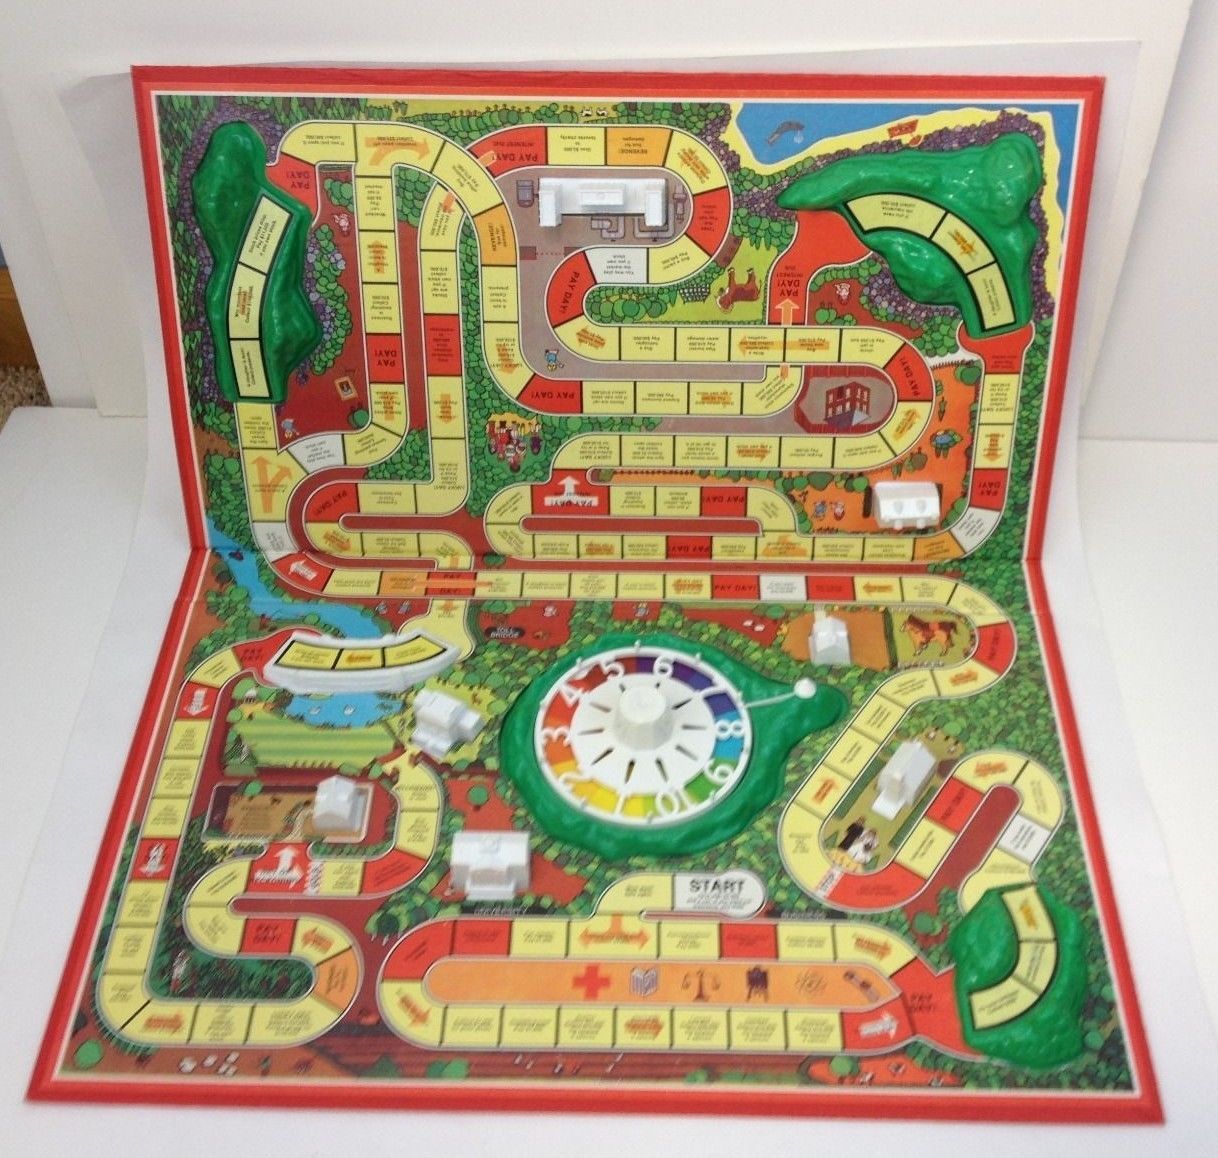 instructions for the game of life